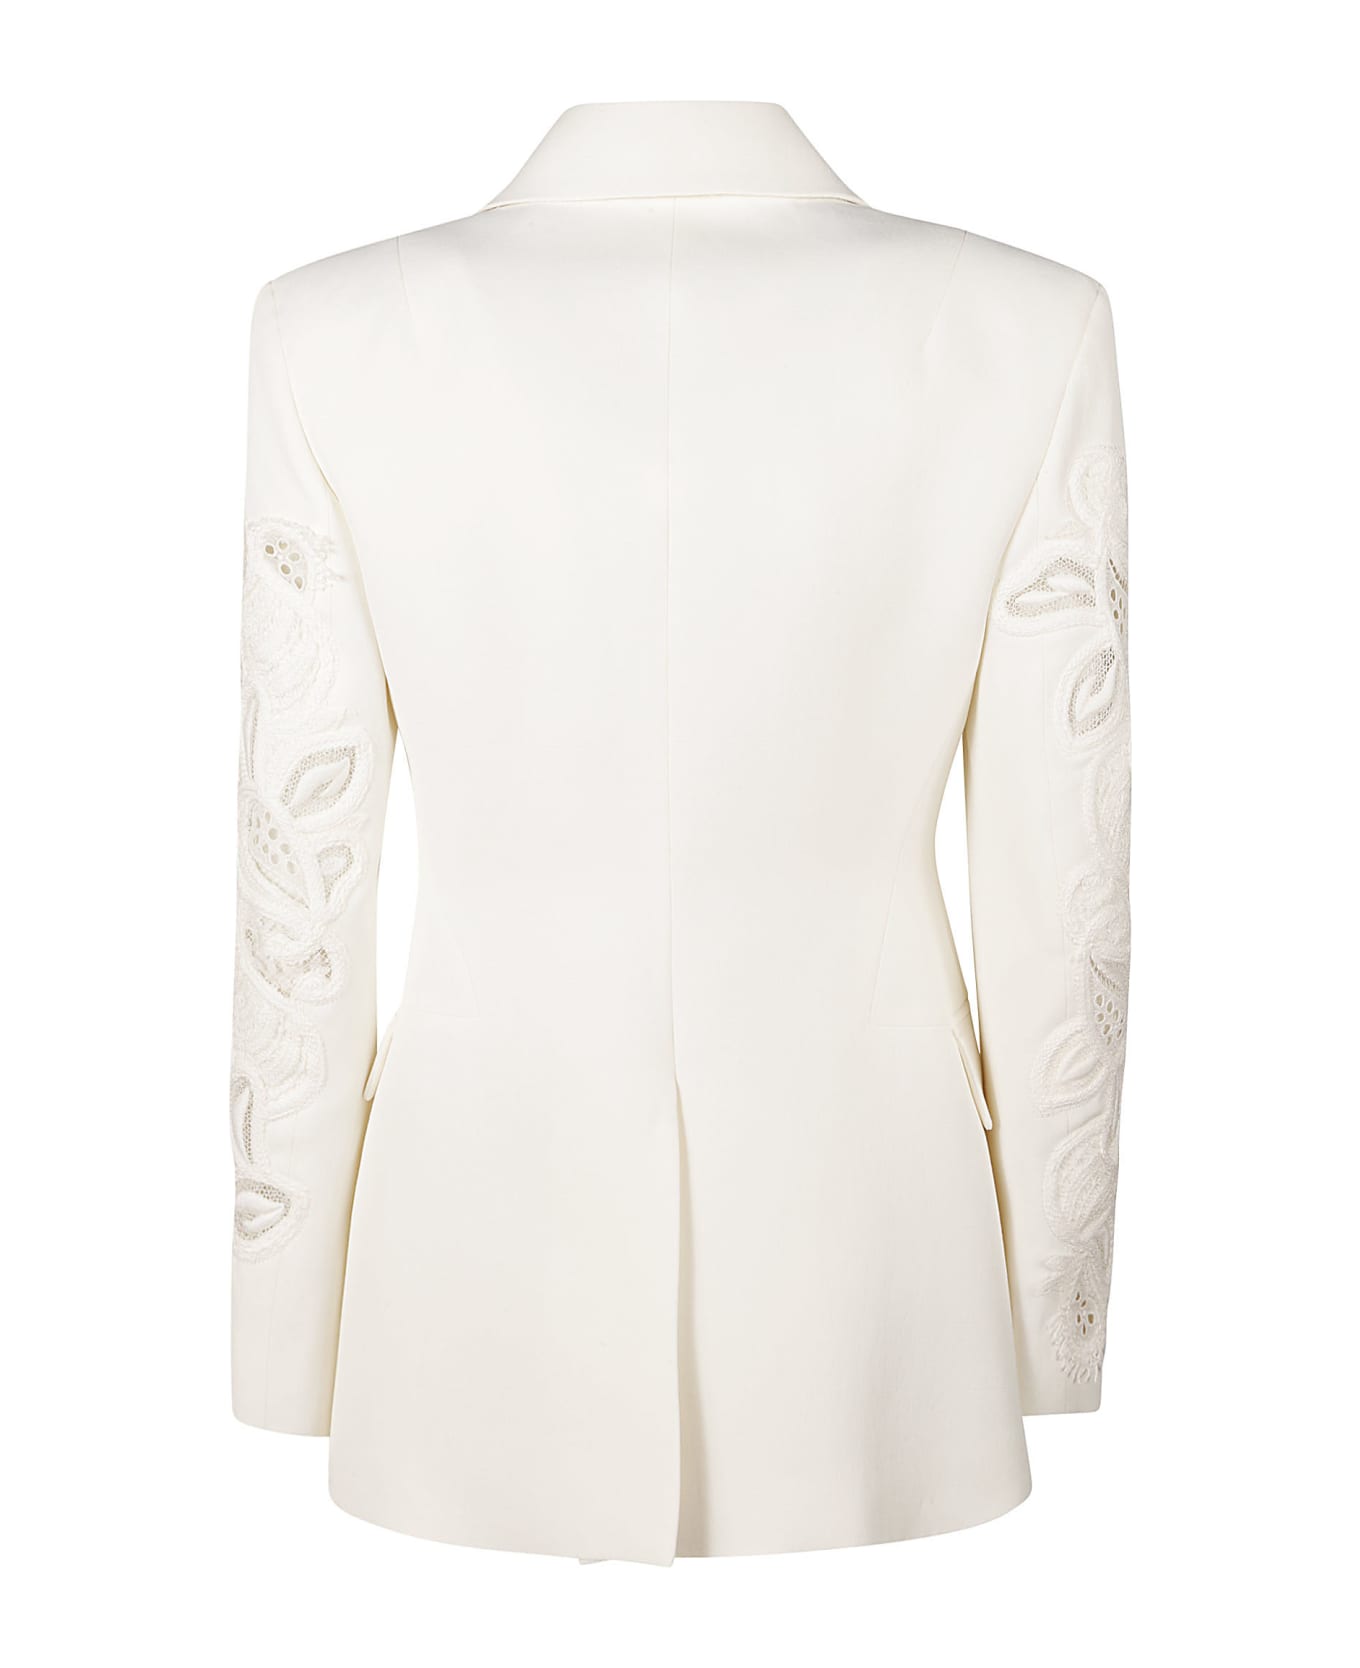 Ermanno Scervino Floral Perforated Sleeve Blazer - White ブレザー